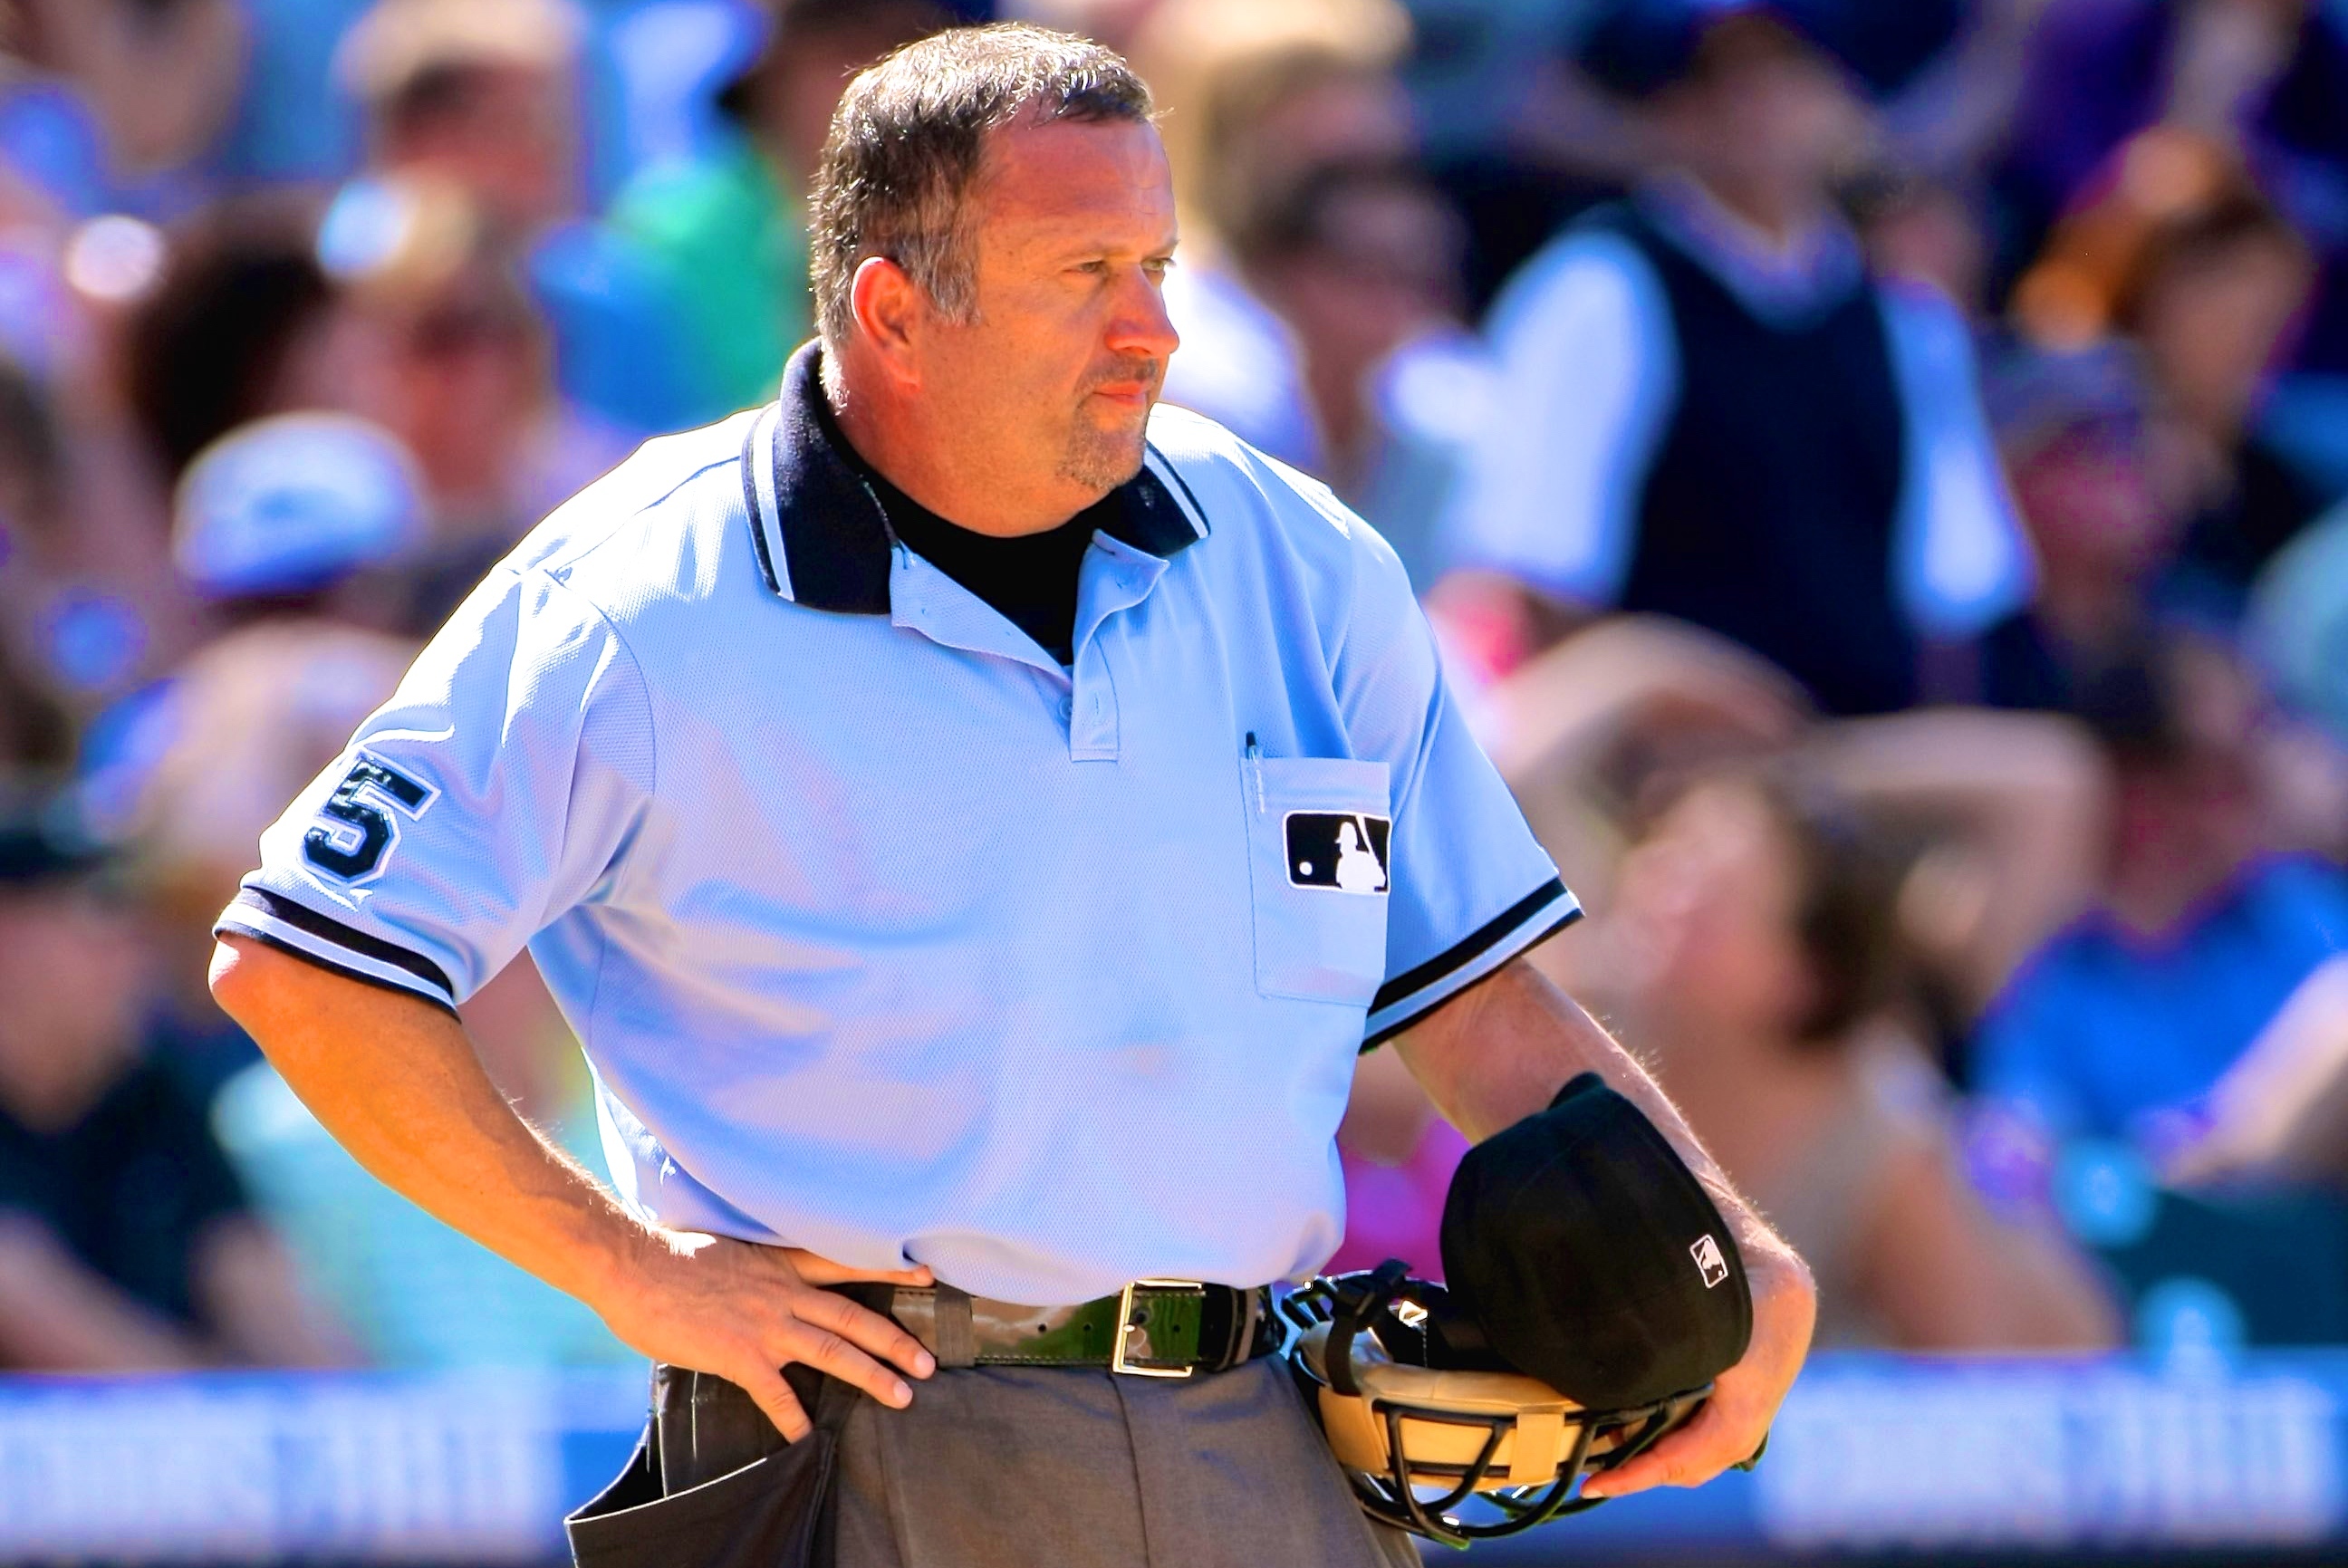 MLB umpire Dale Scott: 'I wasn't intimidated by threats to out me as gay', MLB